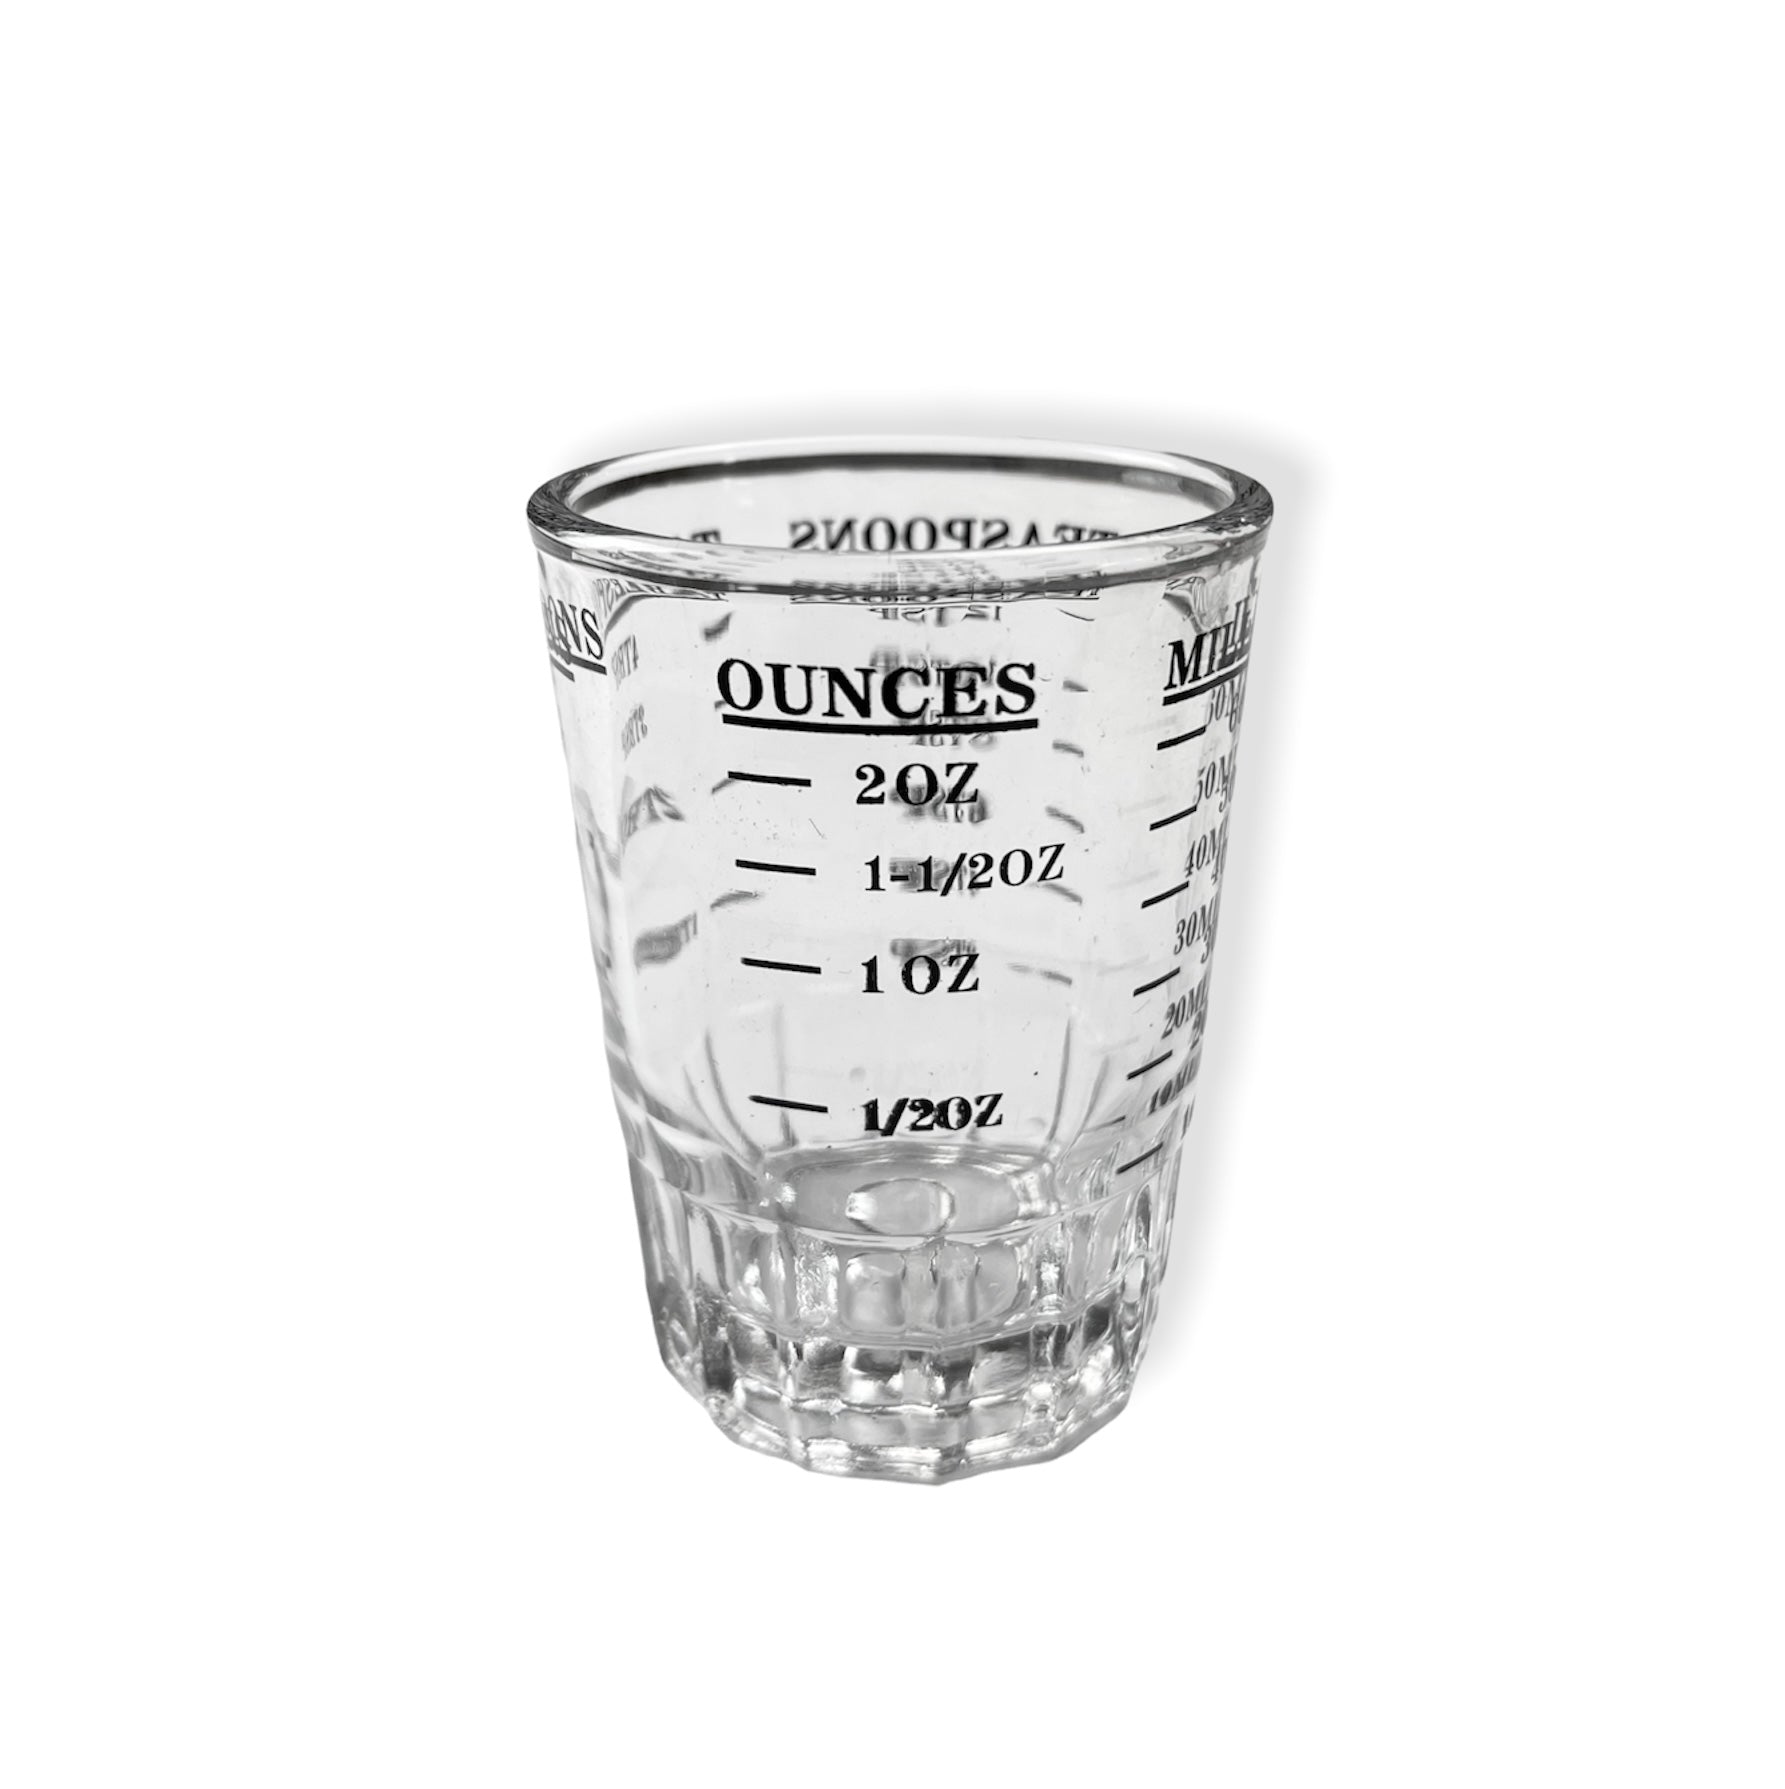 2 Pieces Shot Glasses Measuring Cup with Measuring Lines Coffee